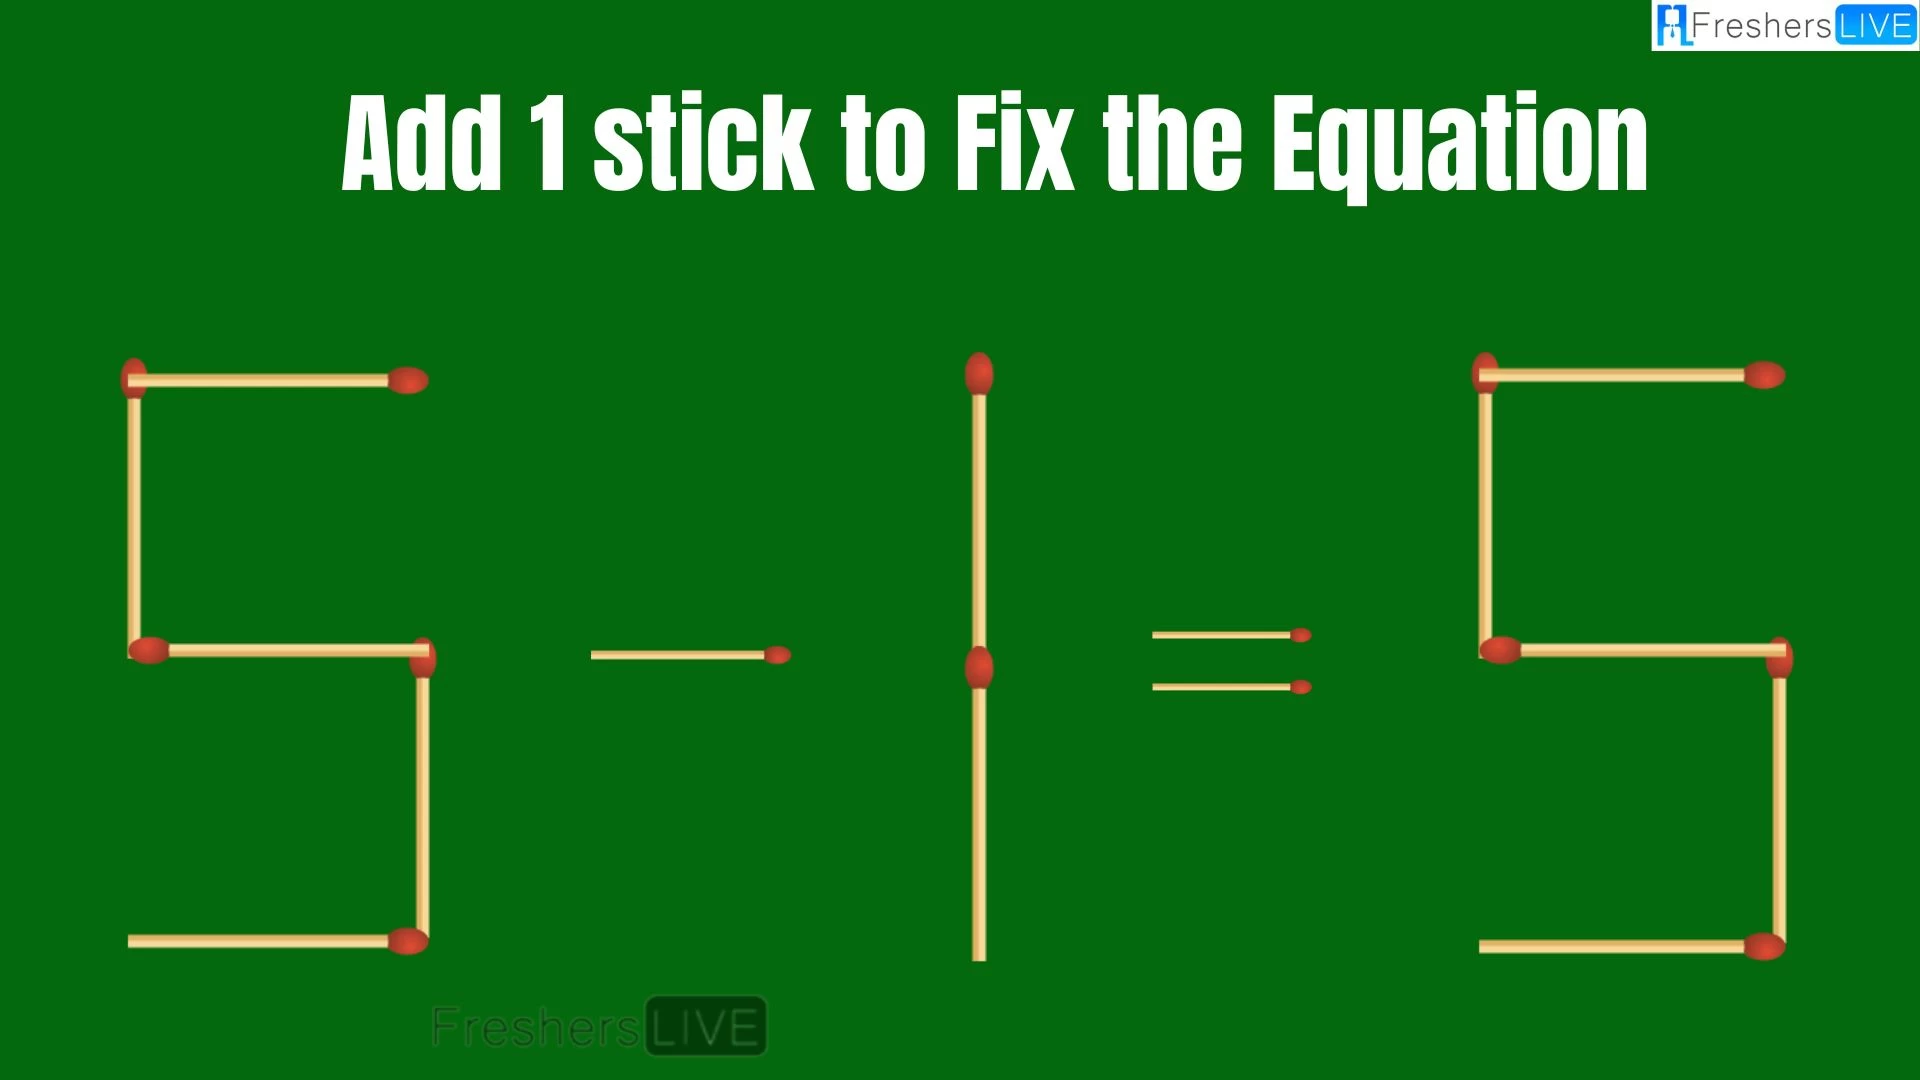 Solve the Puzzle to Transform 5-1=5 by Adding 1 Matchstick to Correct the Equation